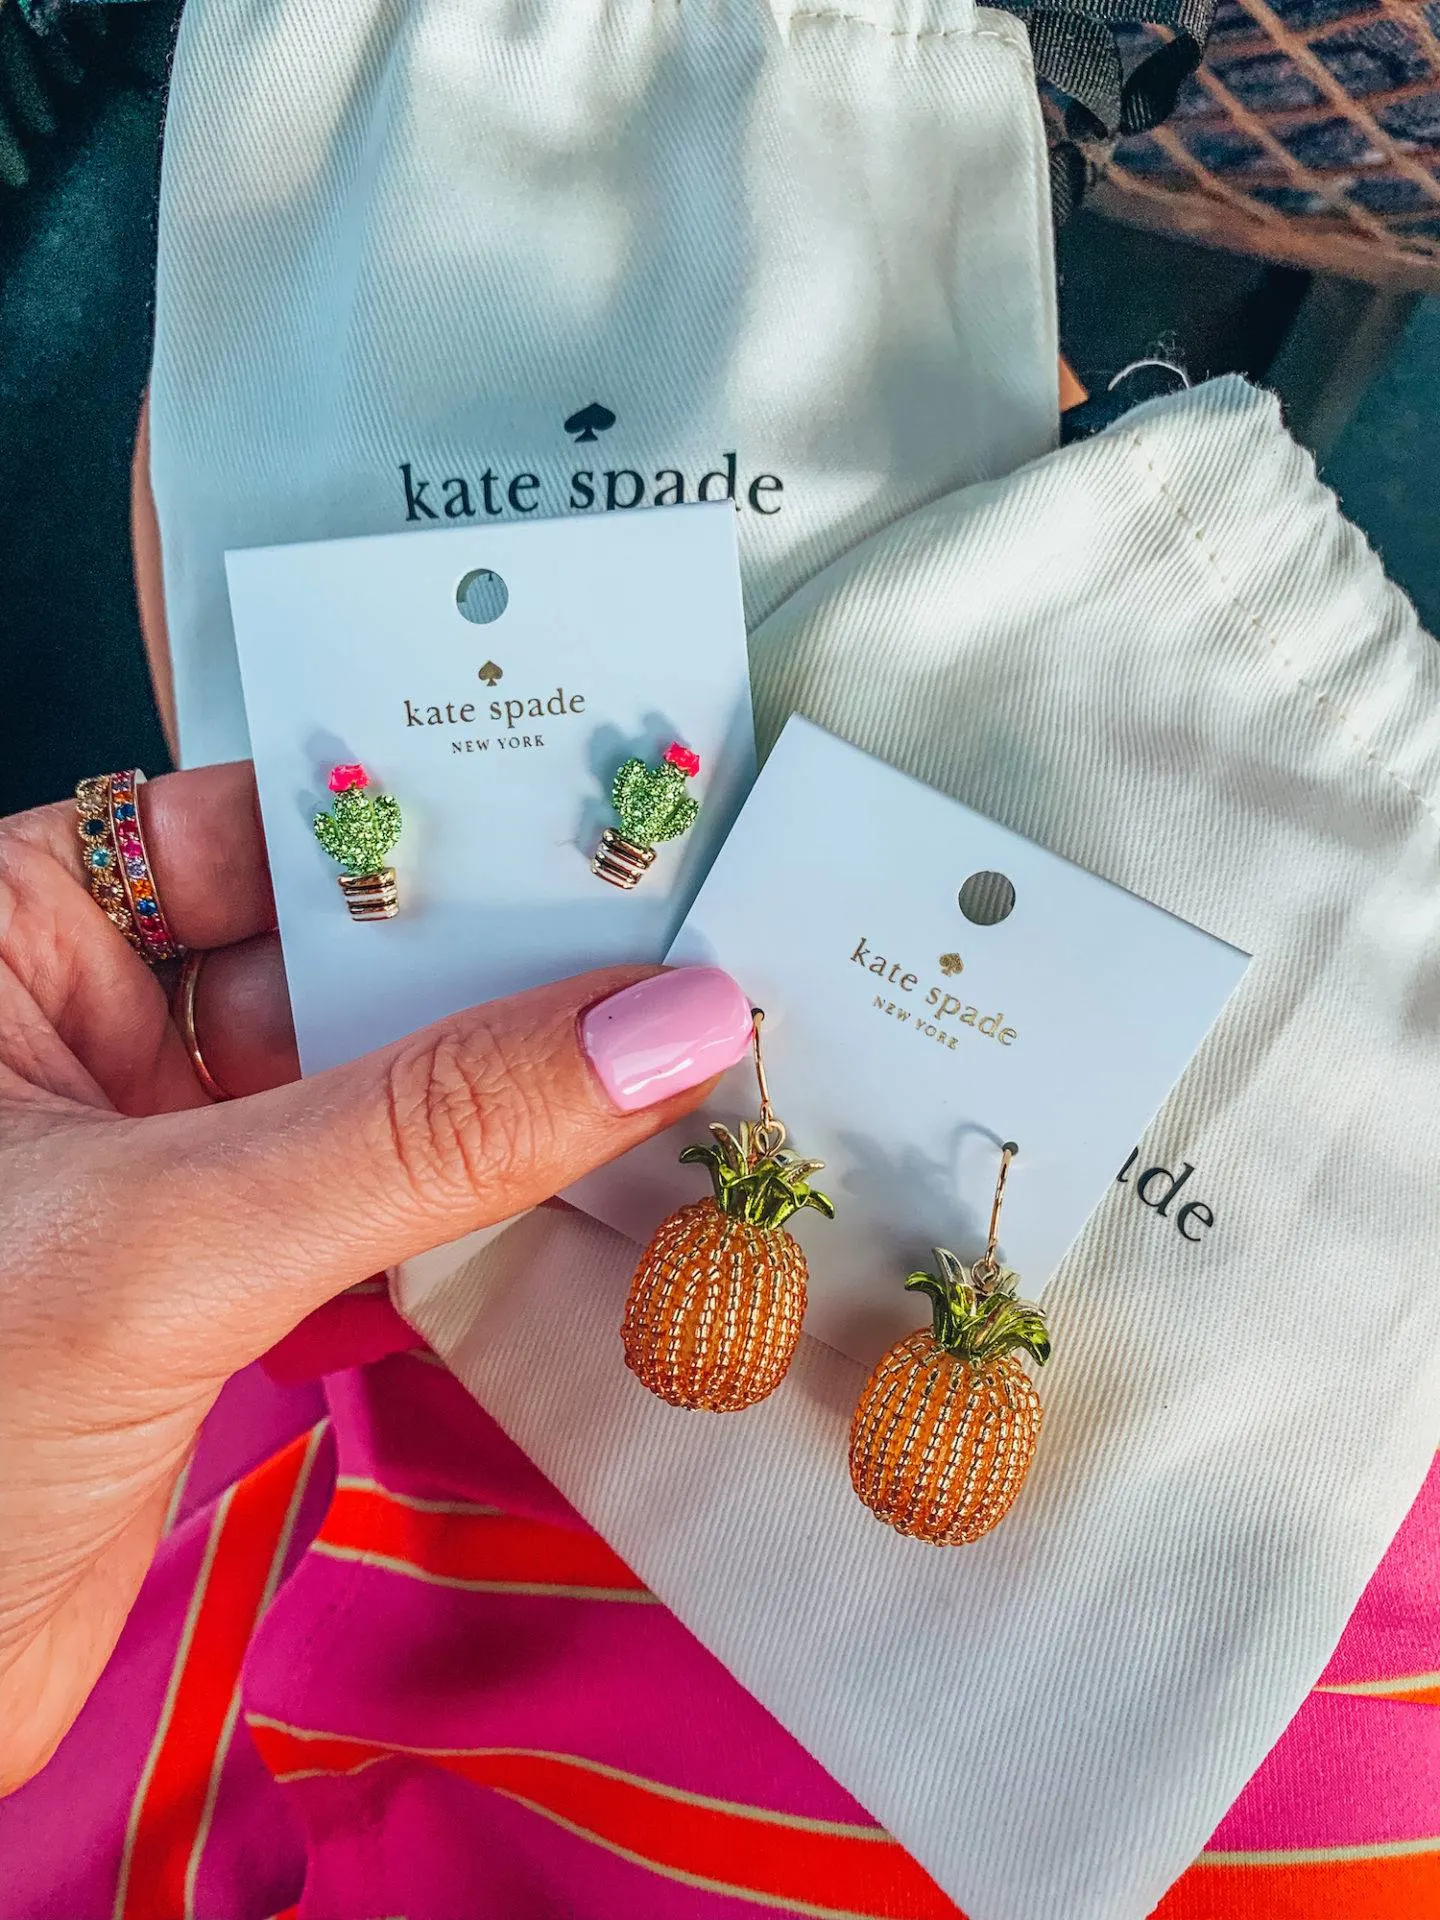 Shopping finds at Sawgrass Mills Outlet Mall in Miami - The cutest tropical earrings